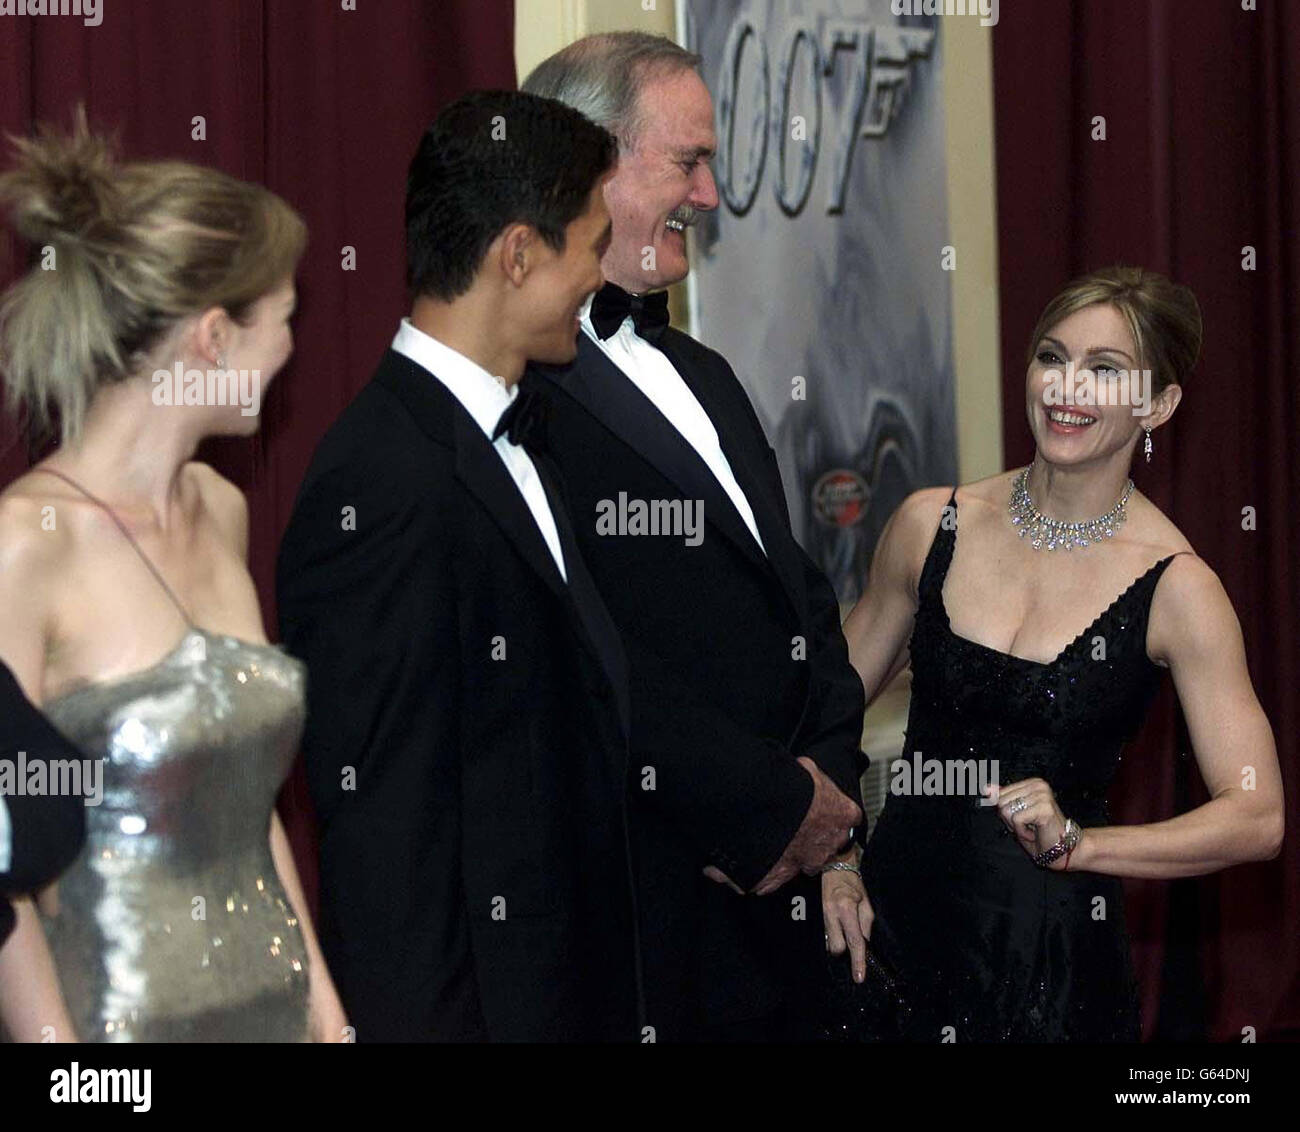 Madonna shares a joke with John Cleese as they wait in line to meet Queen Elizabeth II and The Duke of Edinburgh at the premiere of 'Die Another Day', at the Royal Albert Hall. Stock Photo